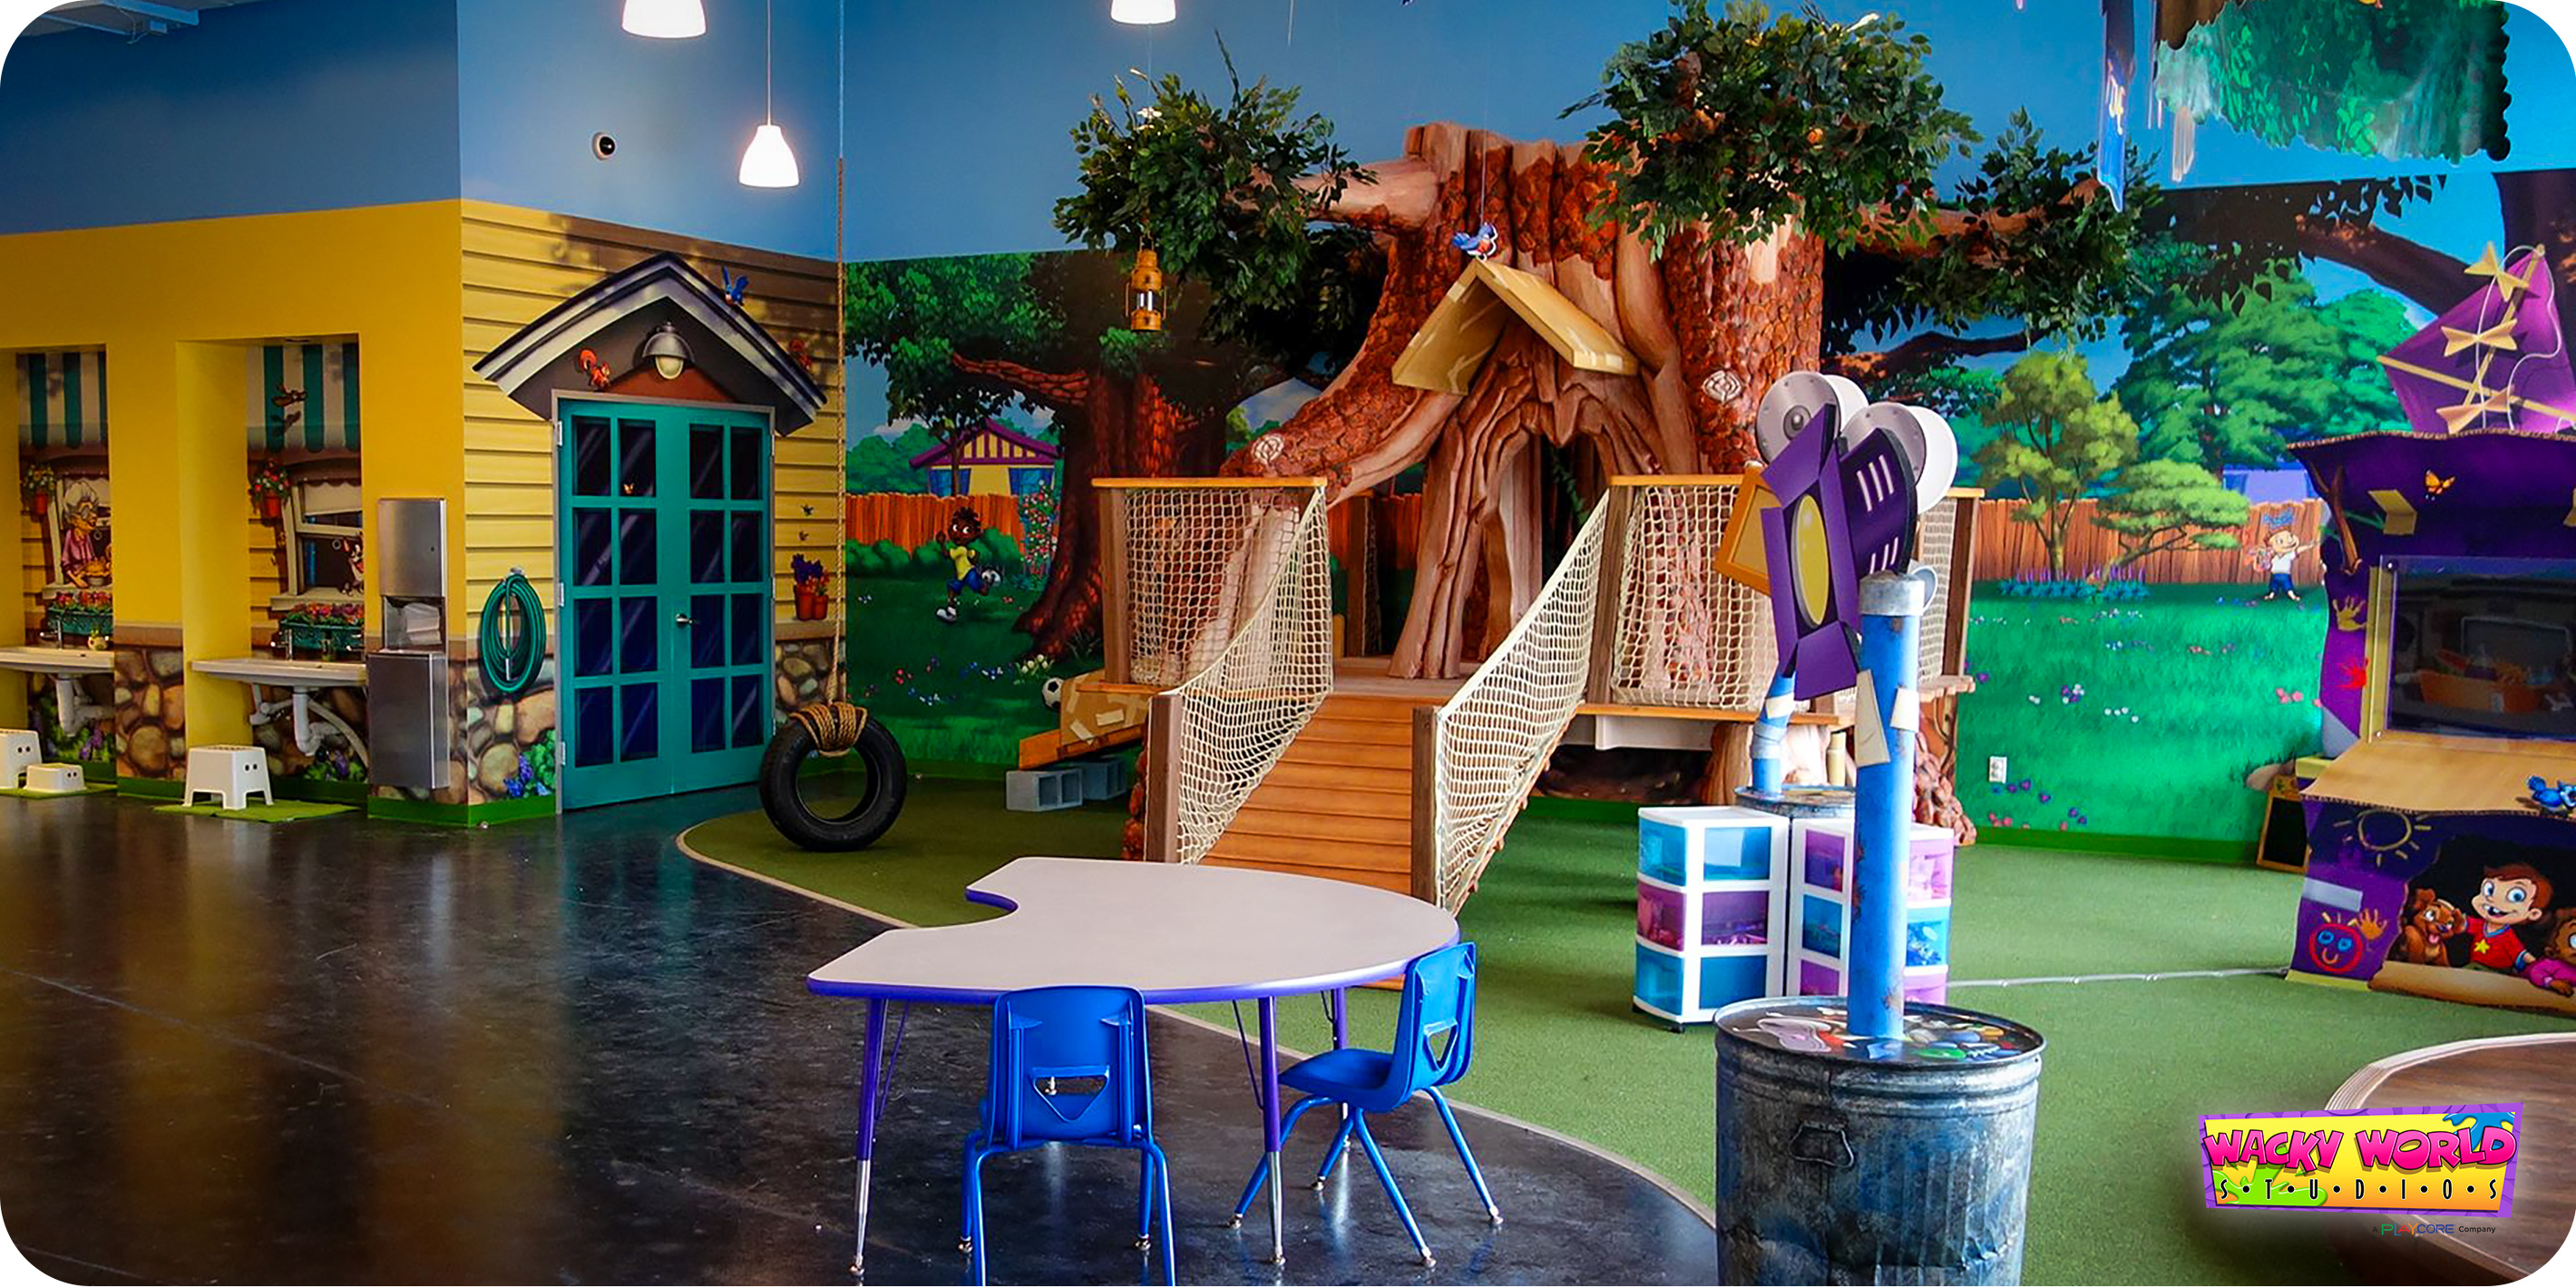 Ashley's Playhouse Drop-in Childcare